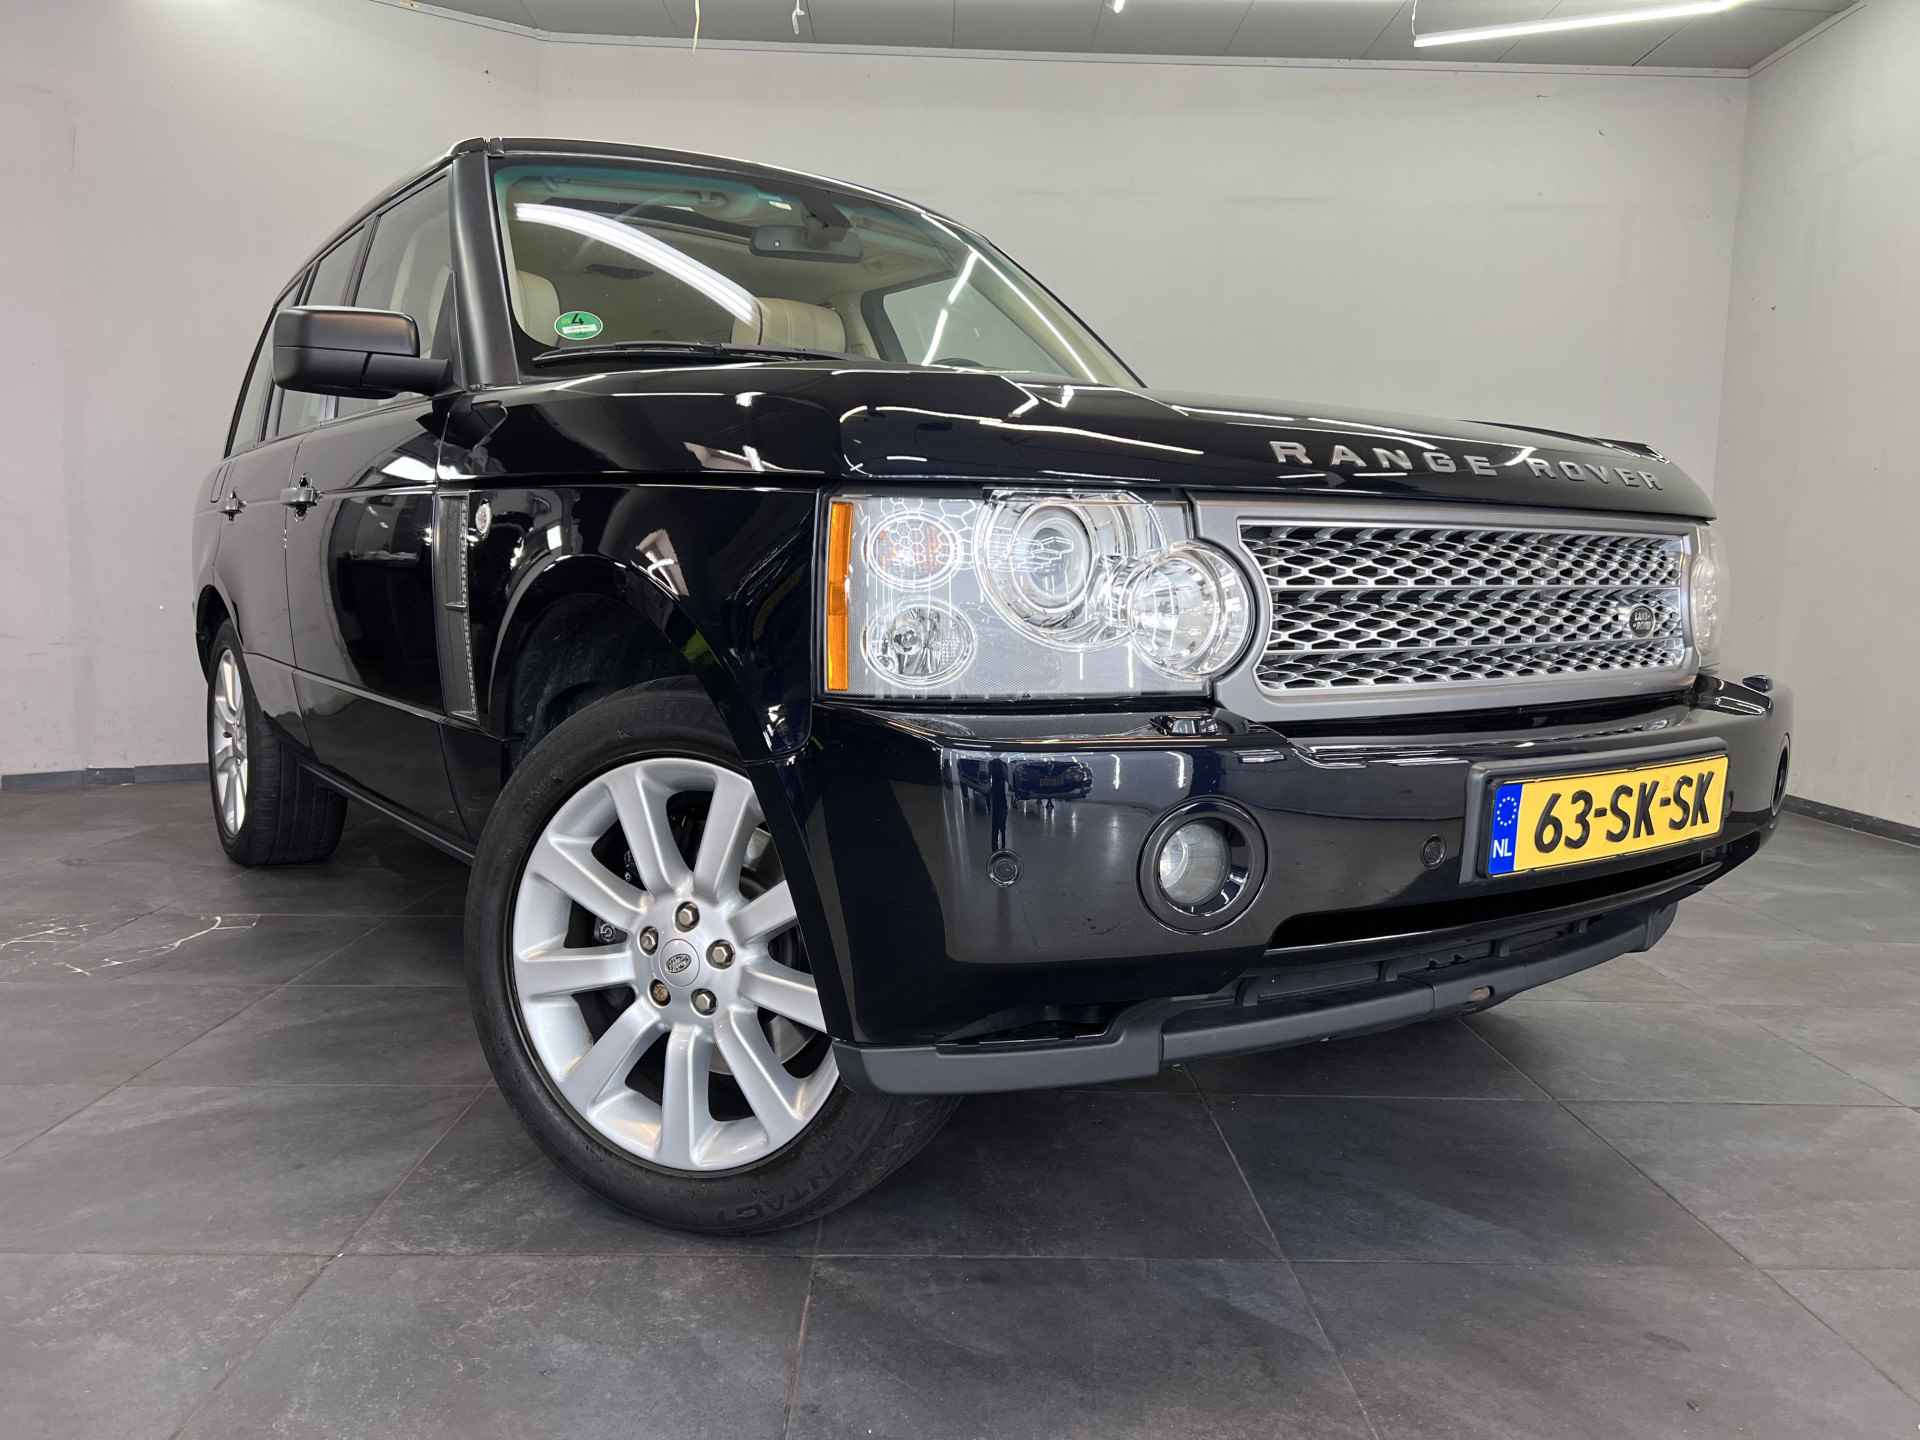 Land Rover Range Rover 4.2 V8 Supercharged ✅UNIEKE STAAT✅Airco✅Cruise controle✅Navigatie✅5 deurs✅TREKHAAK - 32/52